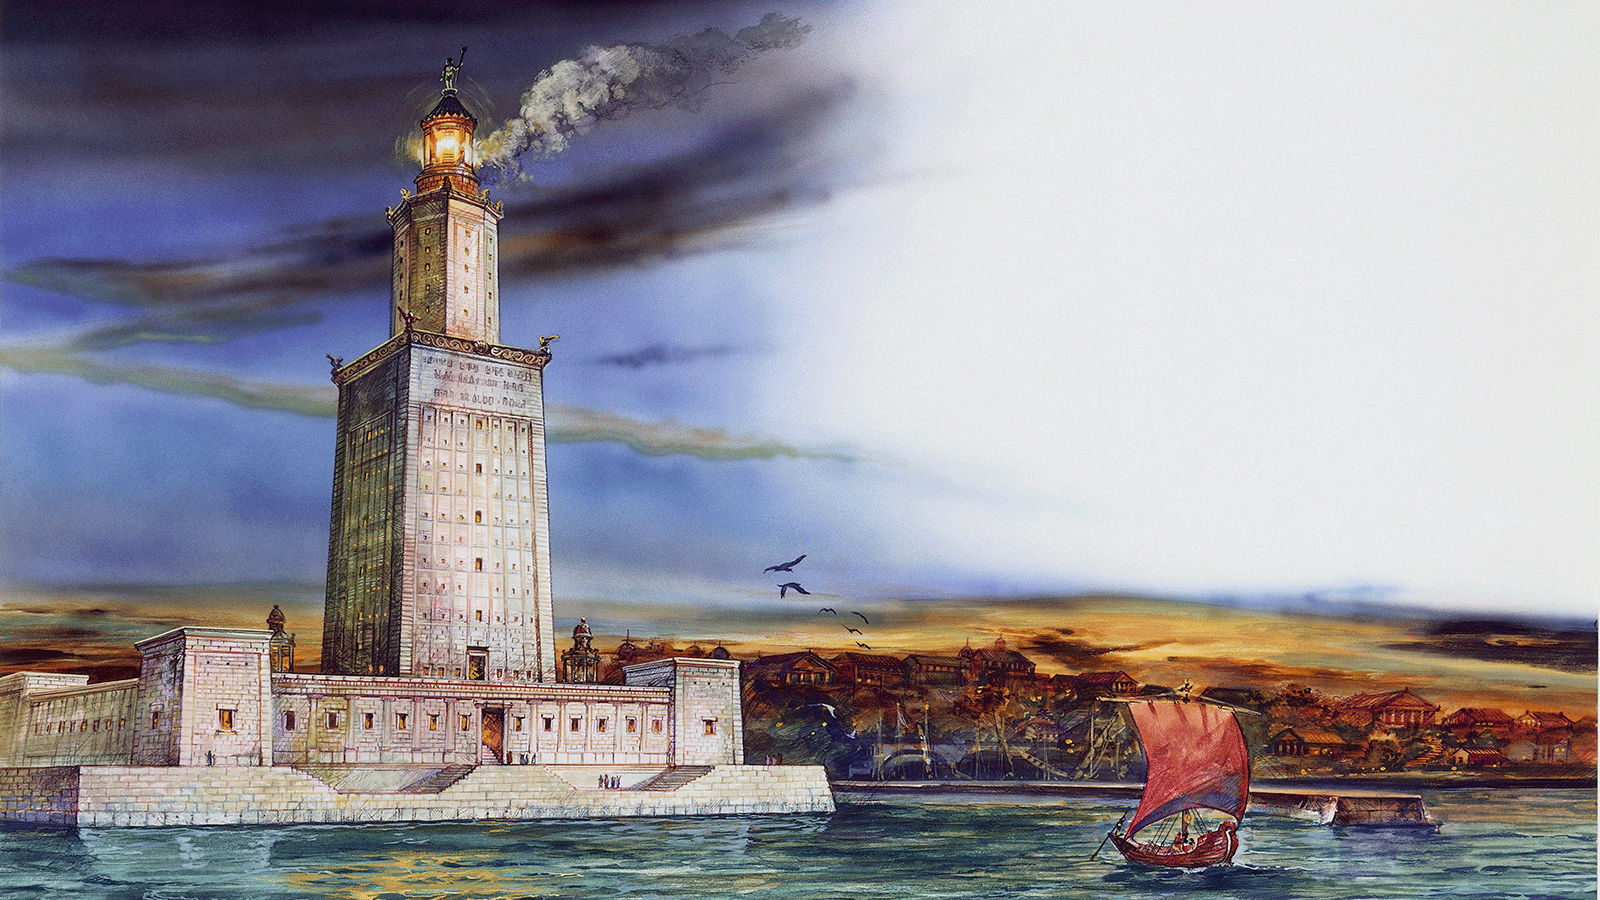 The size of the Alexandria Lighthouse and technology it utilized made it one of the wonders of the ancient world. Credit: The Detailed History